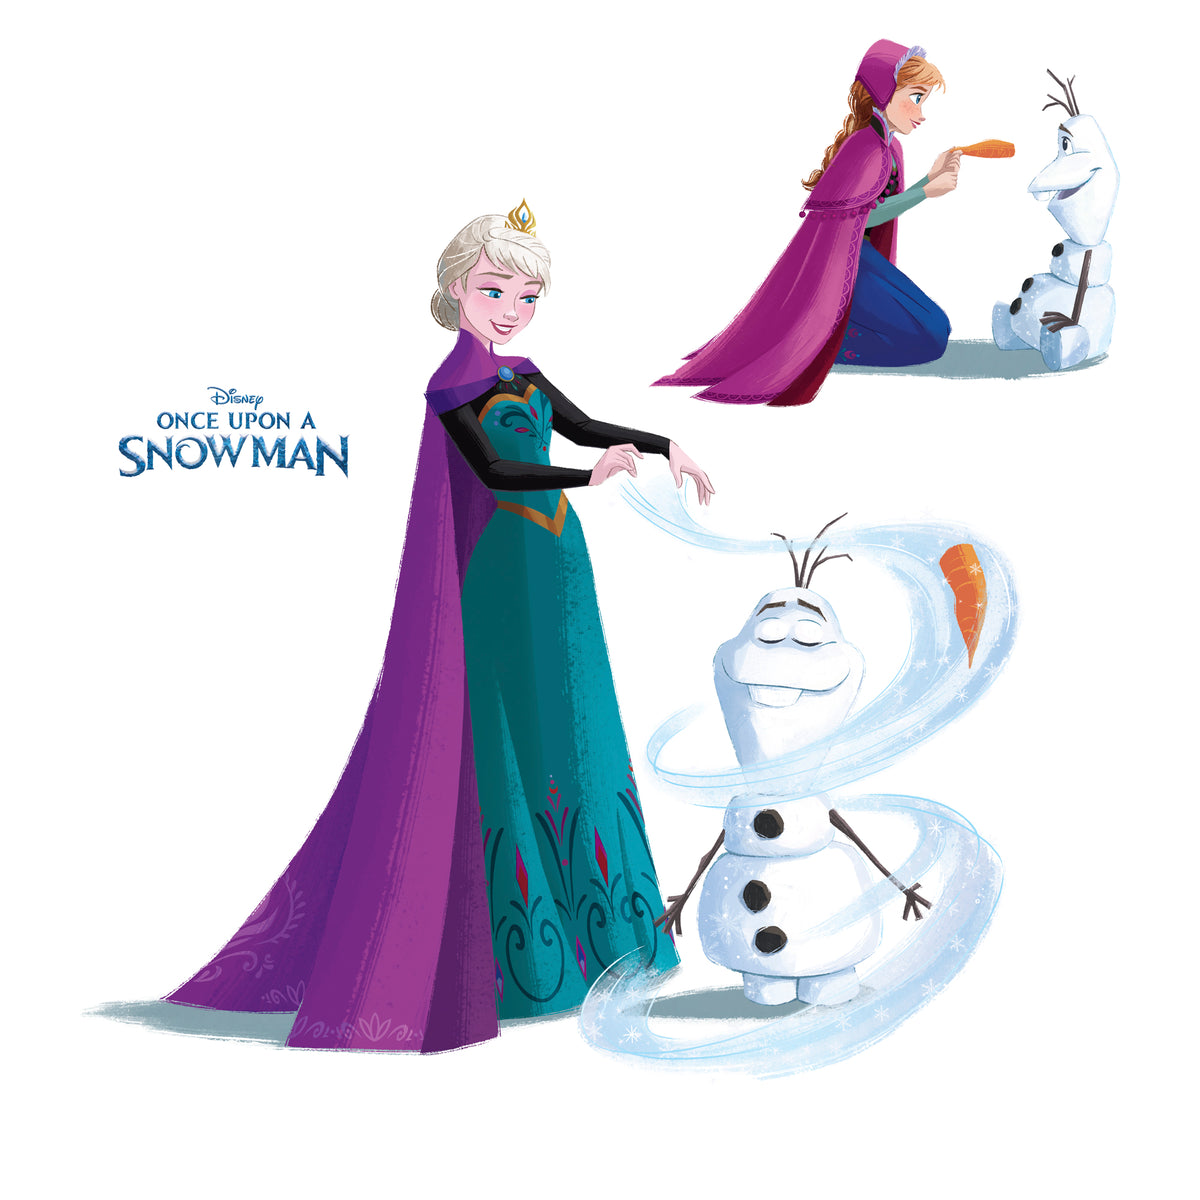 Olaf And Elsa Frozen Once Upon A Snowman Officially Licensed Disney